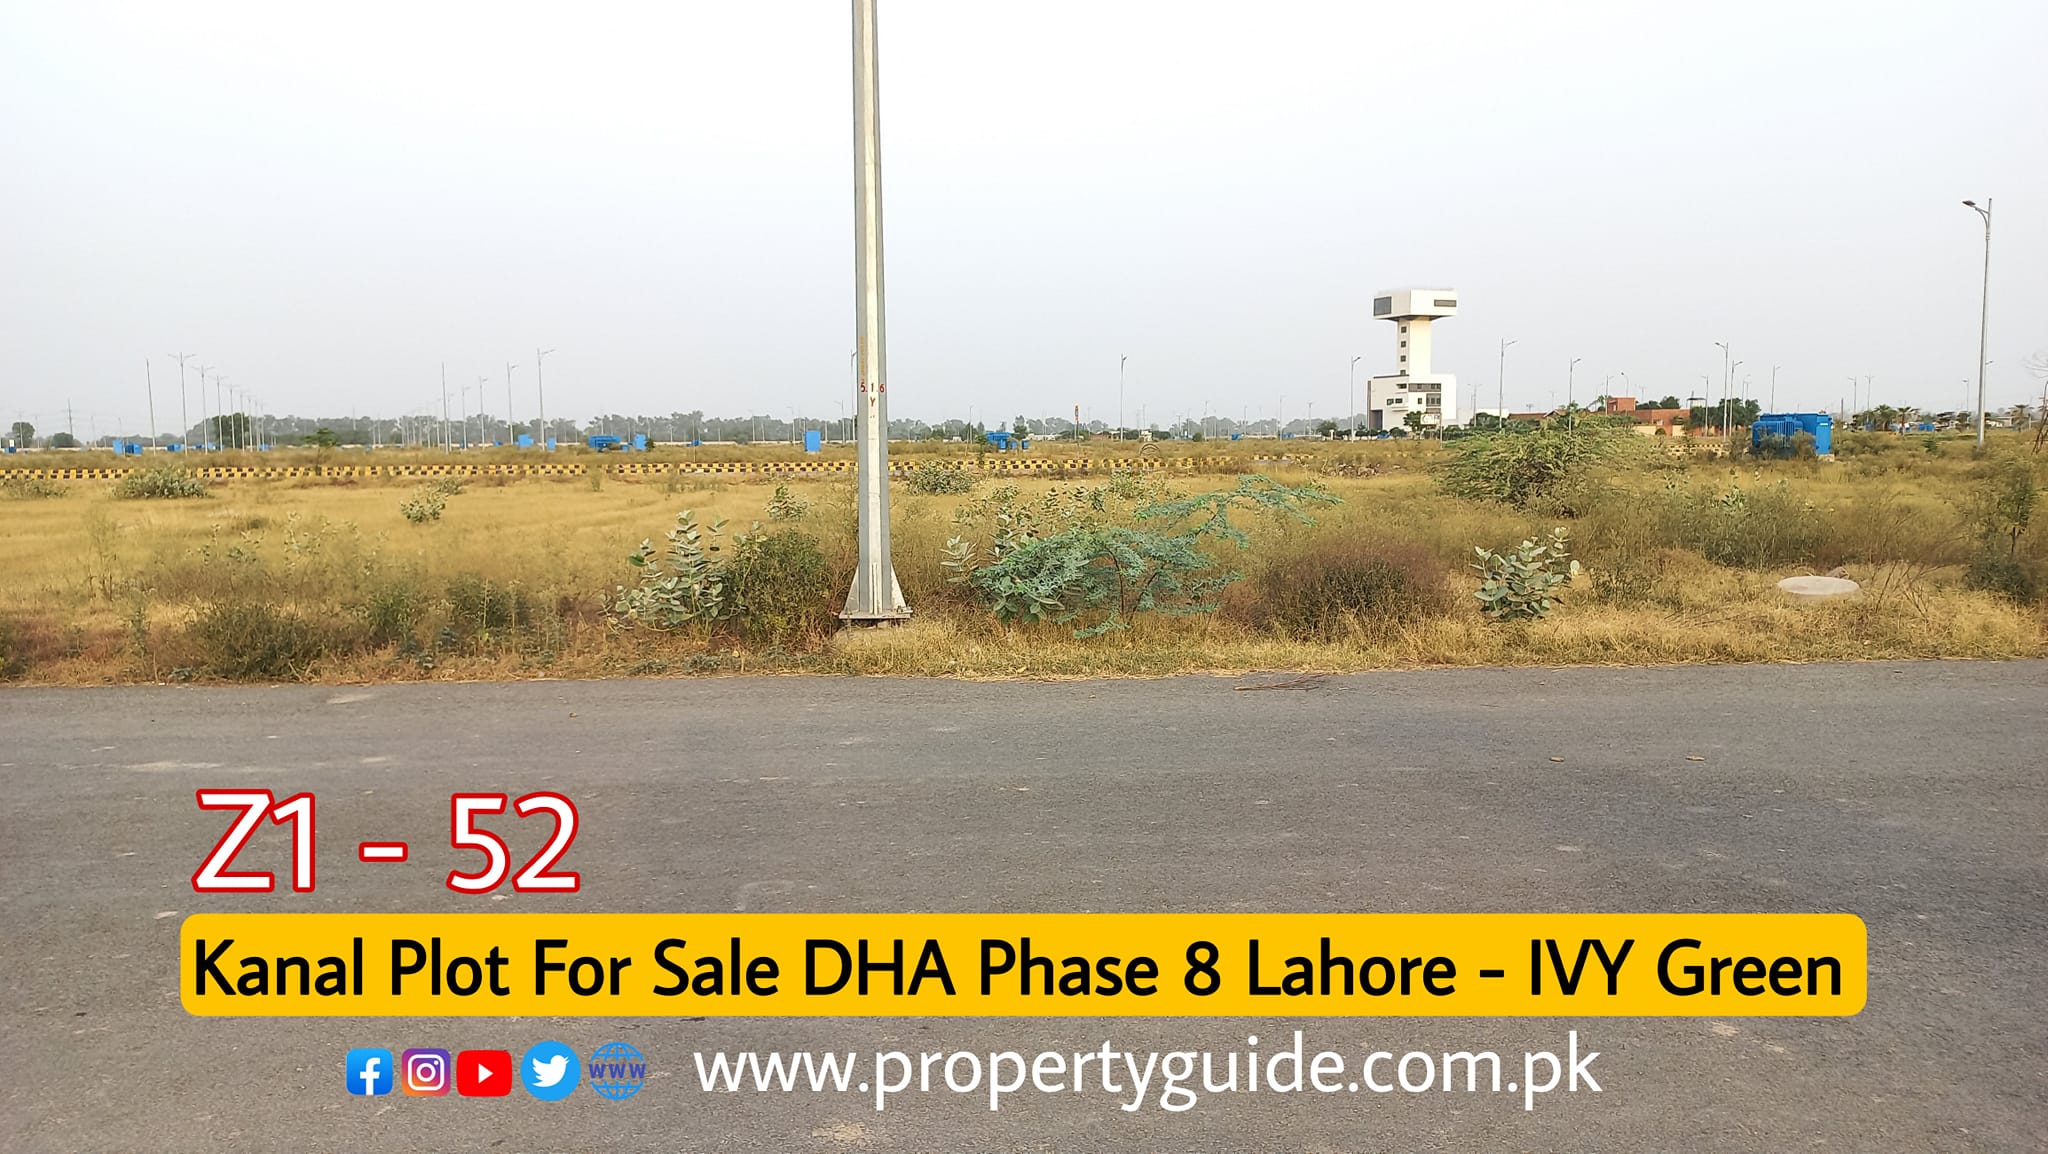 Kanal Plot For Sale DHA Phase 8 Lahore – IVY Green Sector Z